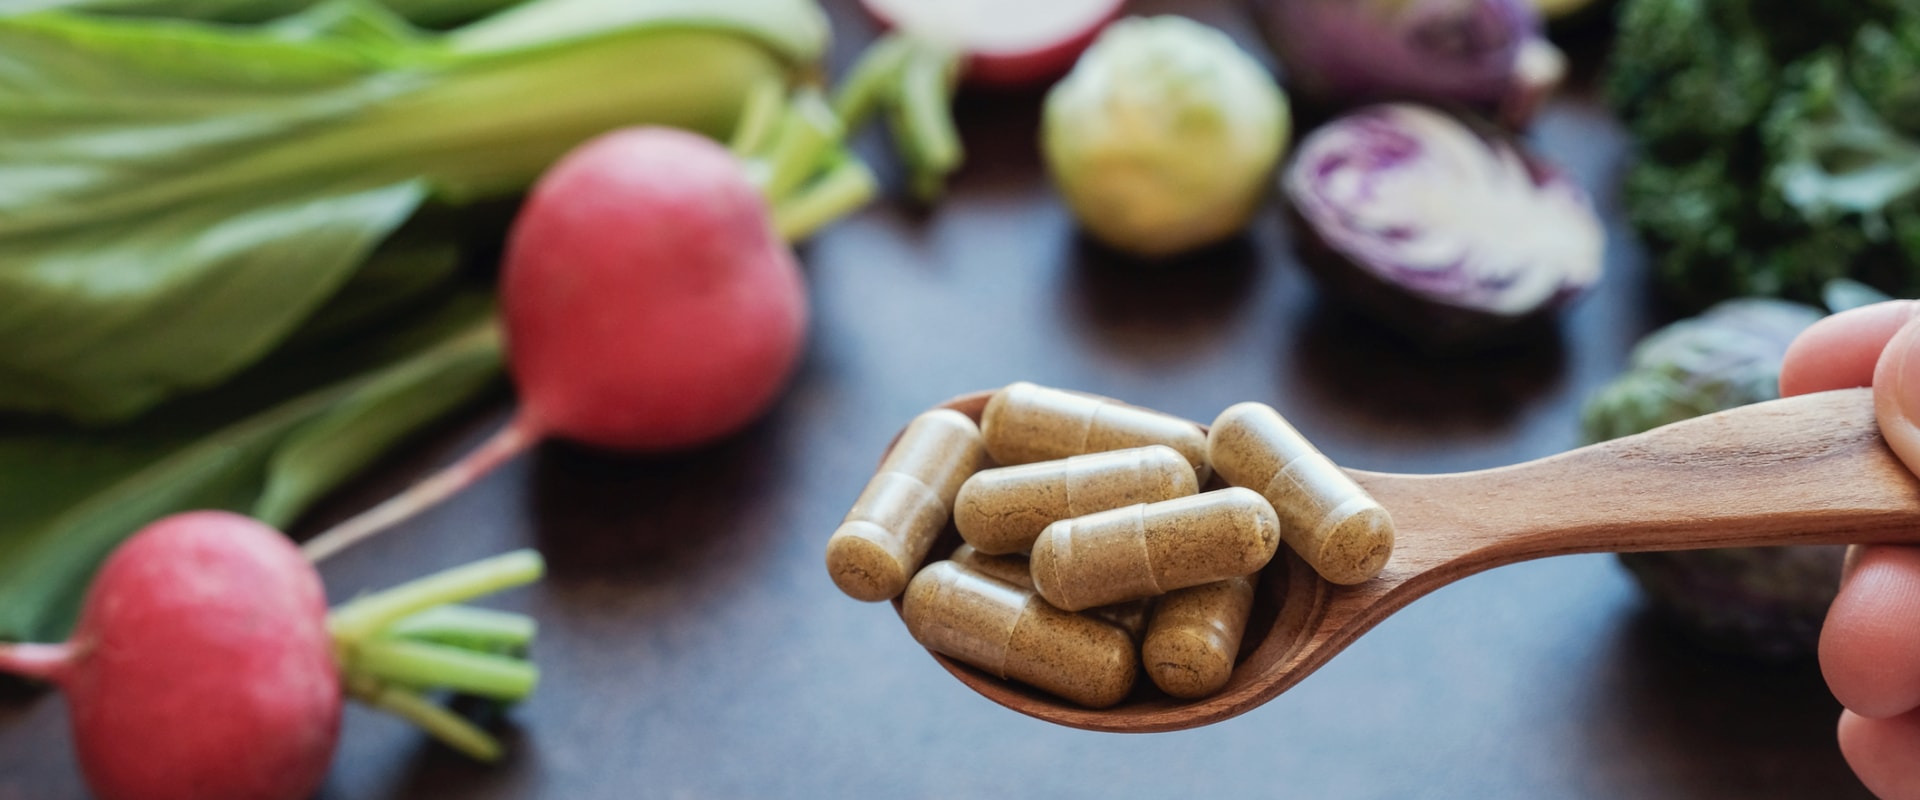 Are all natural supplements safe?